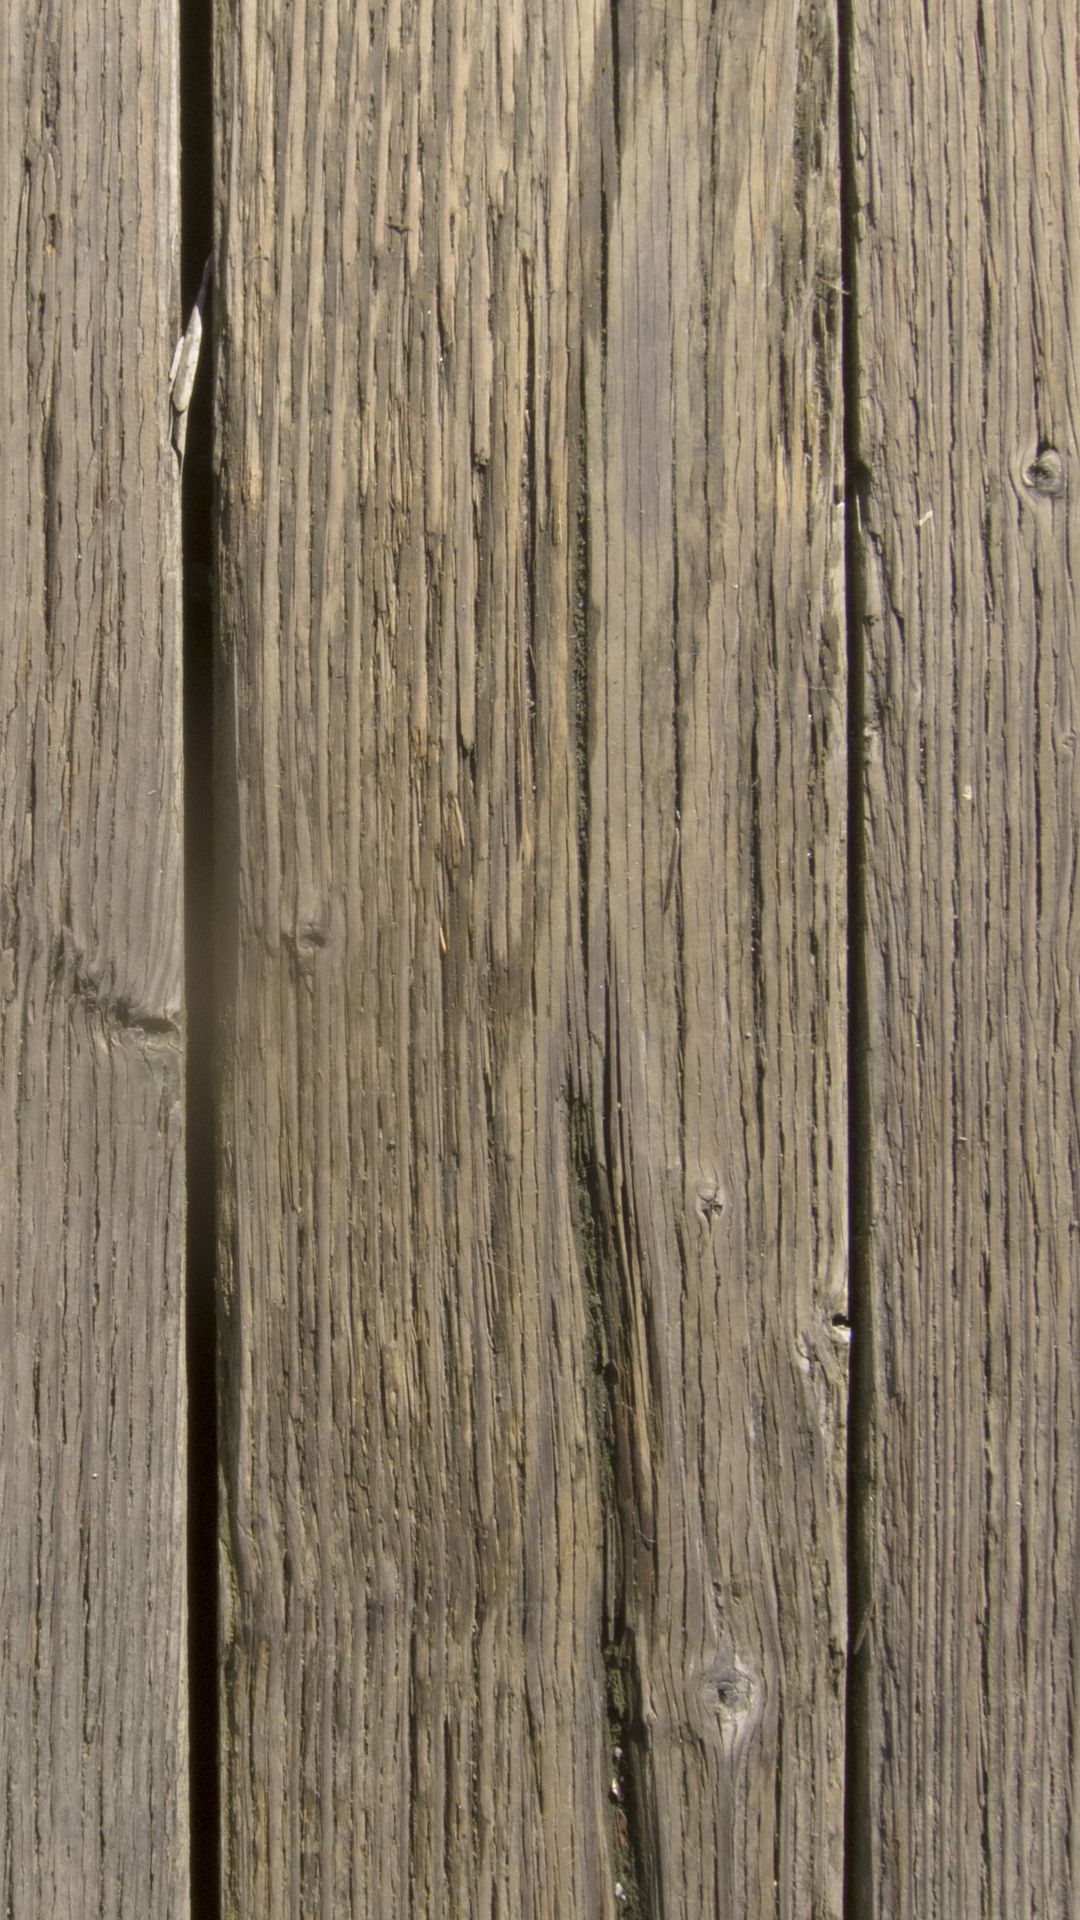 iPhone 6 Wallpapers: Wooden Boards - iPhone6wp.com